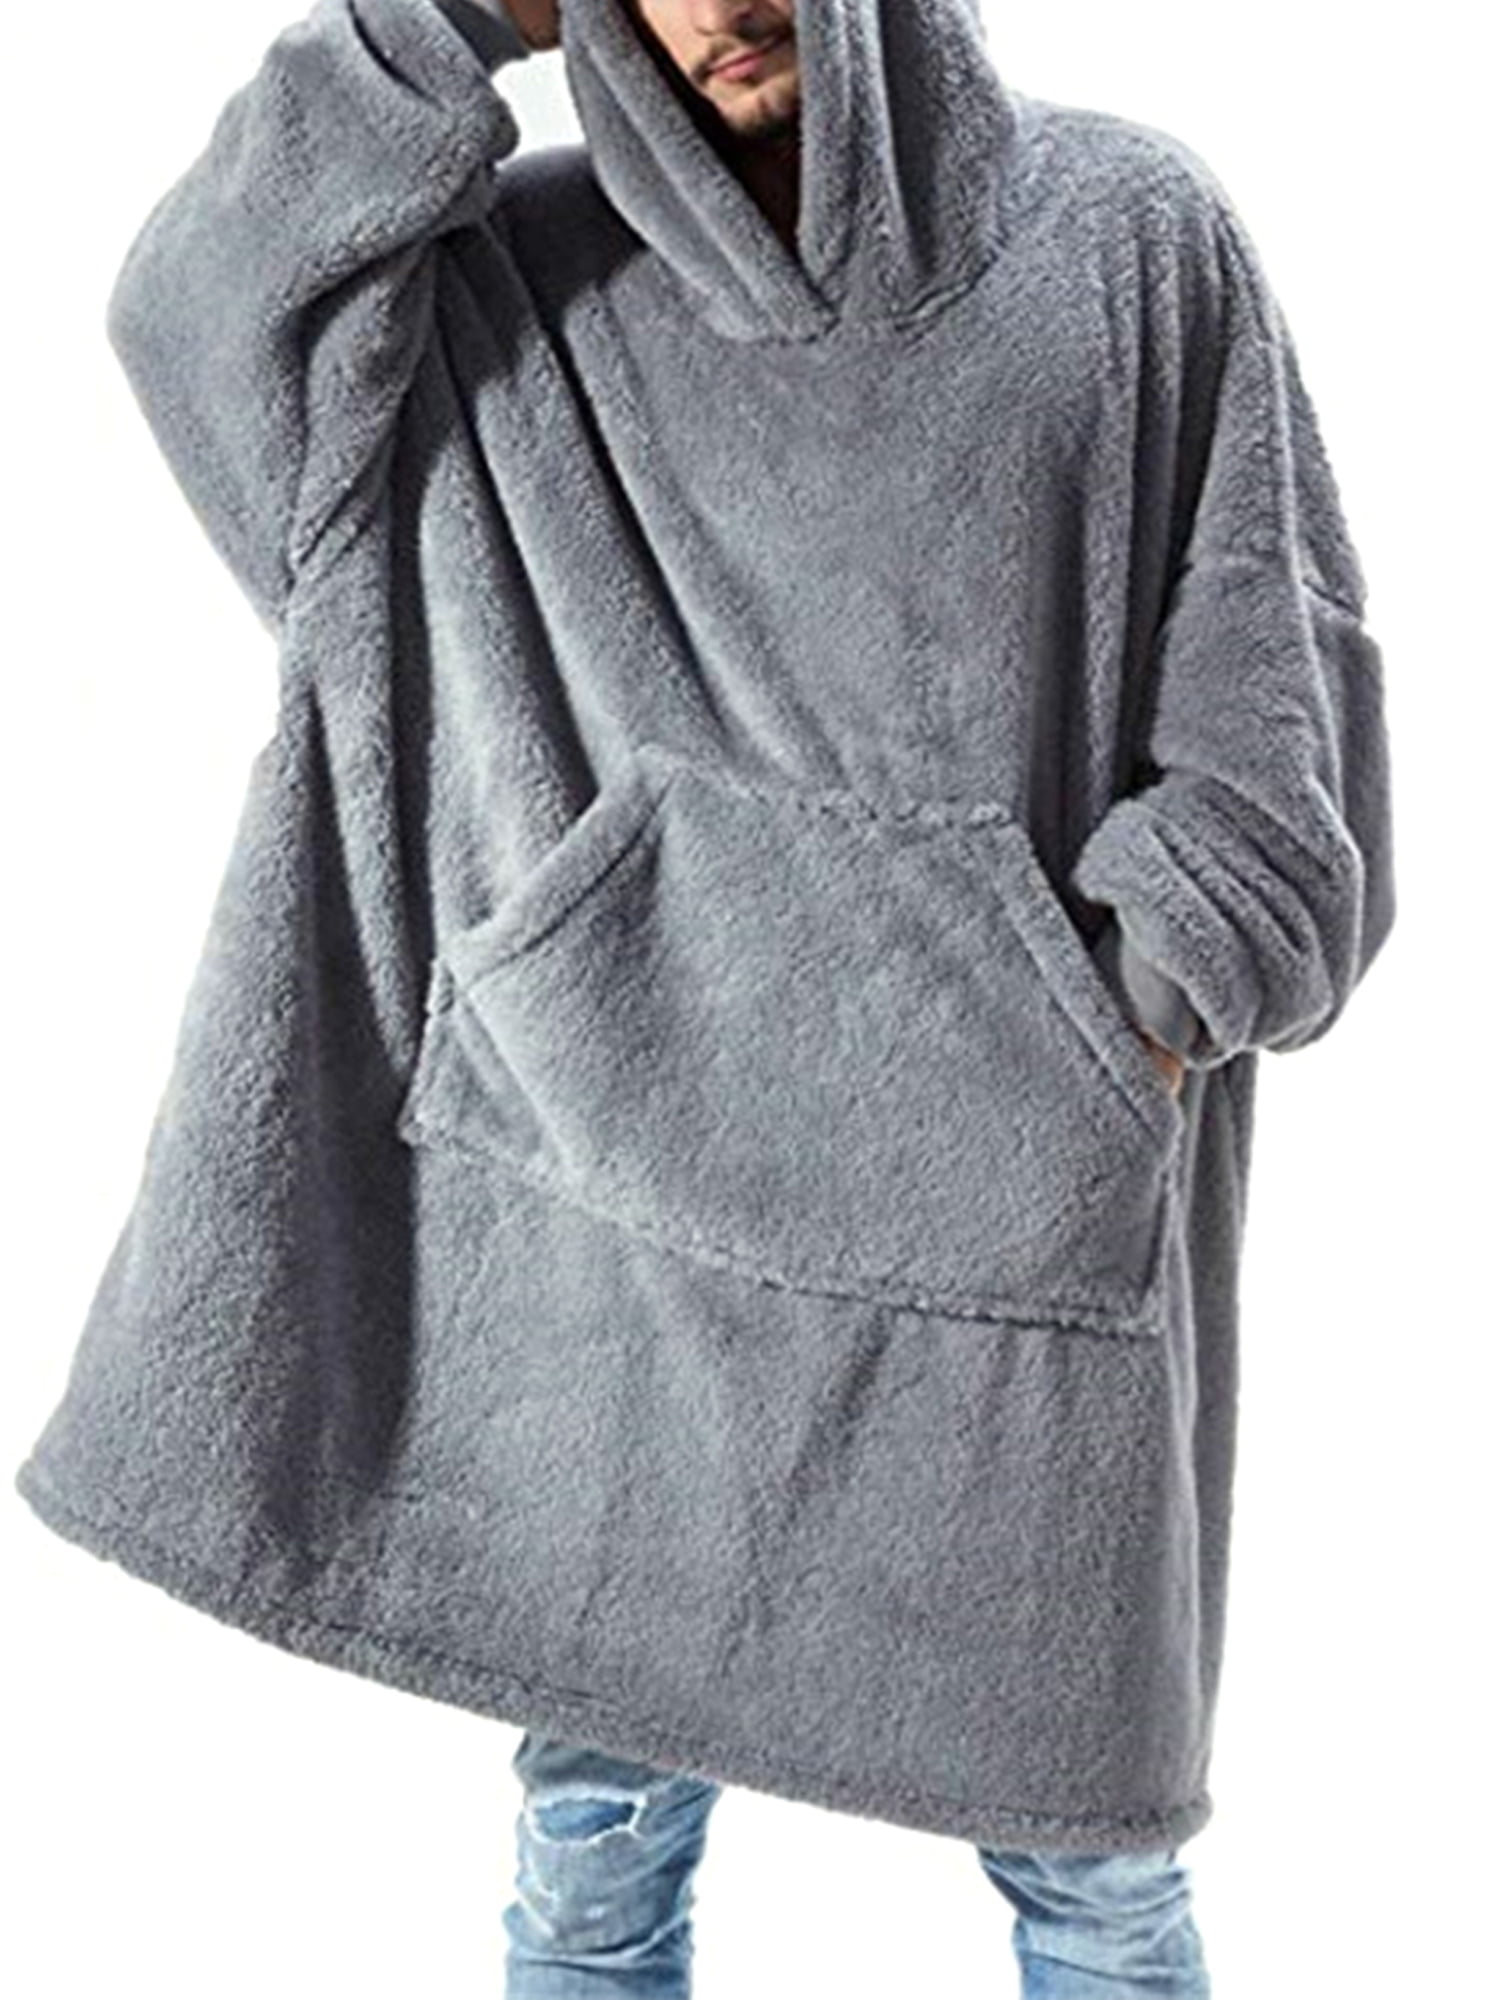 Details about   Loose fit sweatshirt hooded blanket Oversized Sweatshirt Fleece Blanket sweaters 